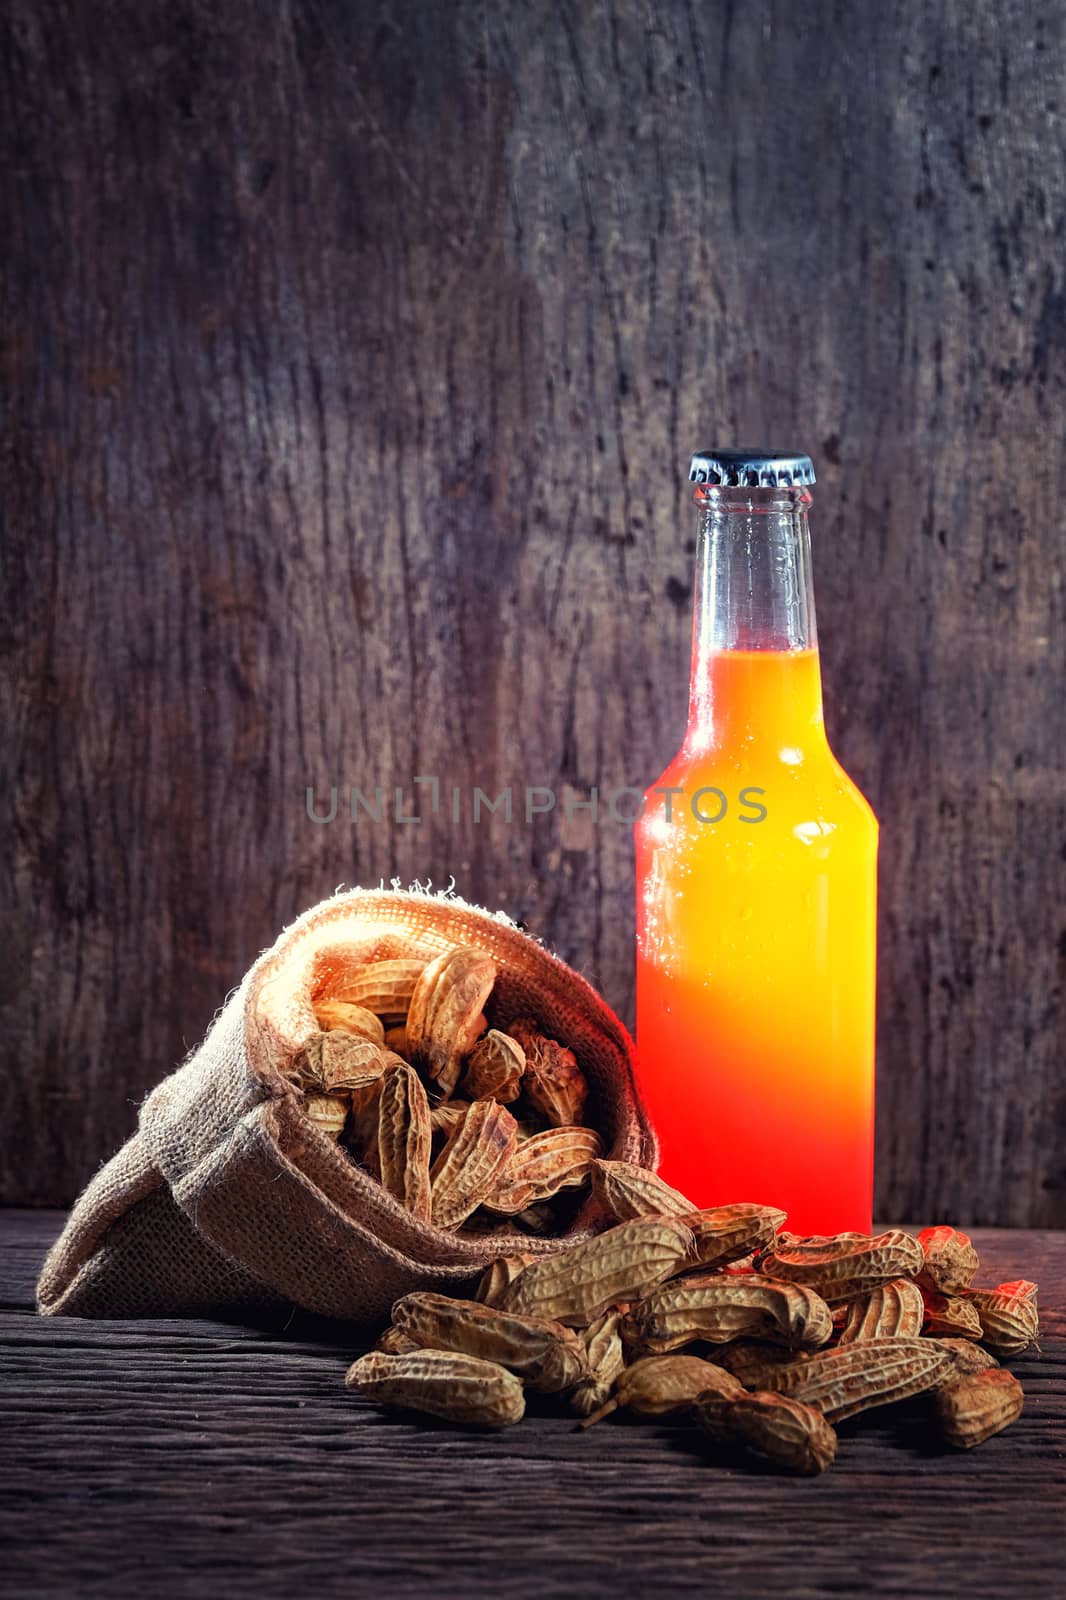 Peanuts and a Beer in red bottle in wood background by Surasak